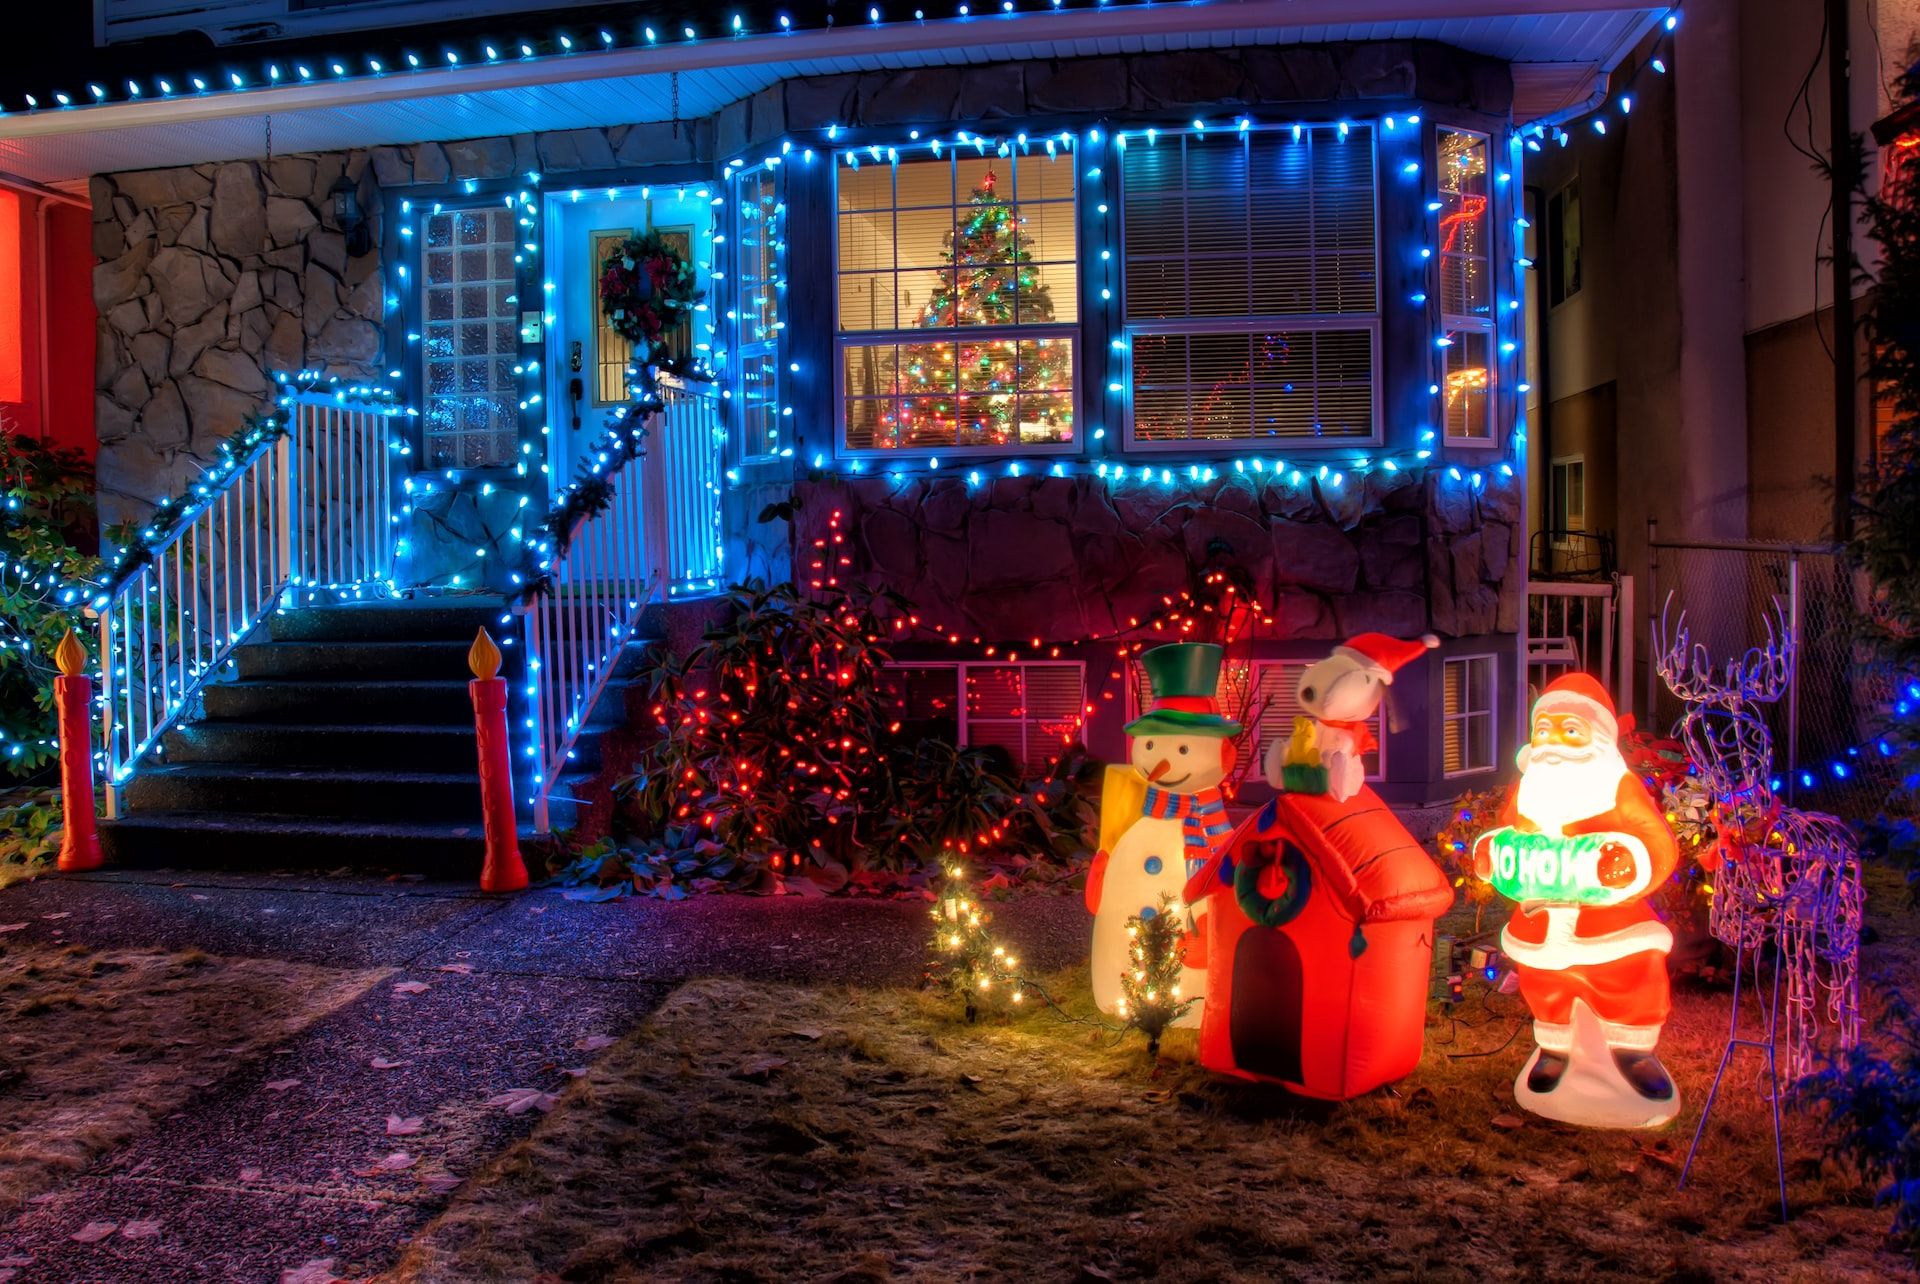 House decorated with Christmas lights